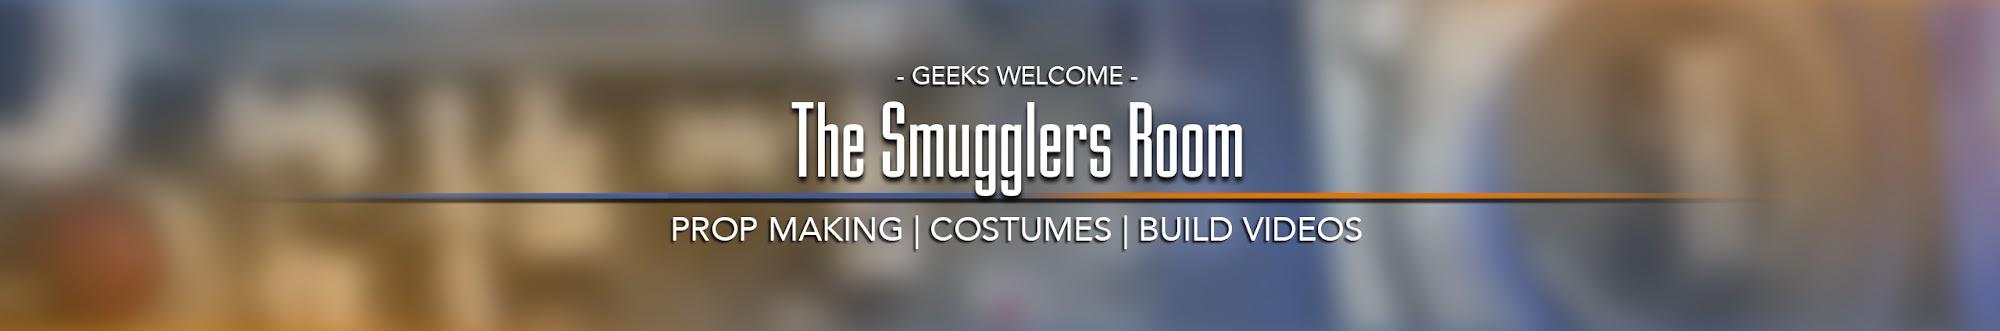 The Smugglers Room